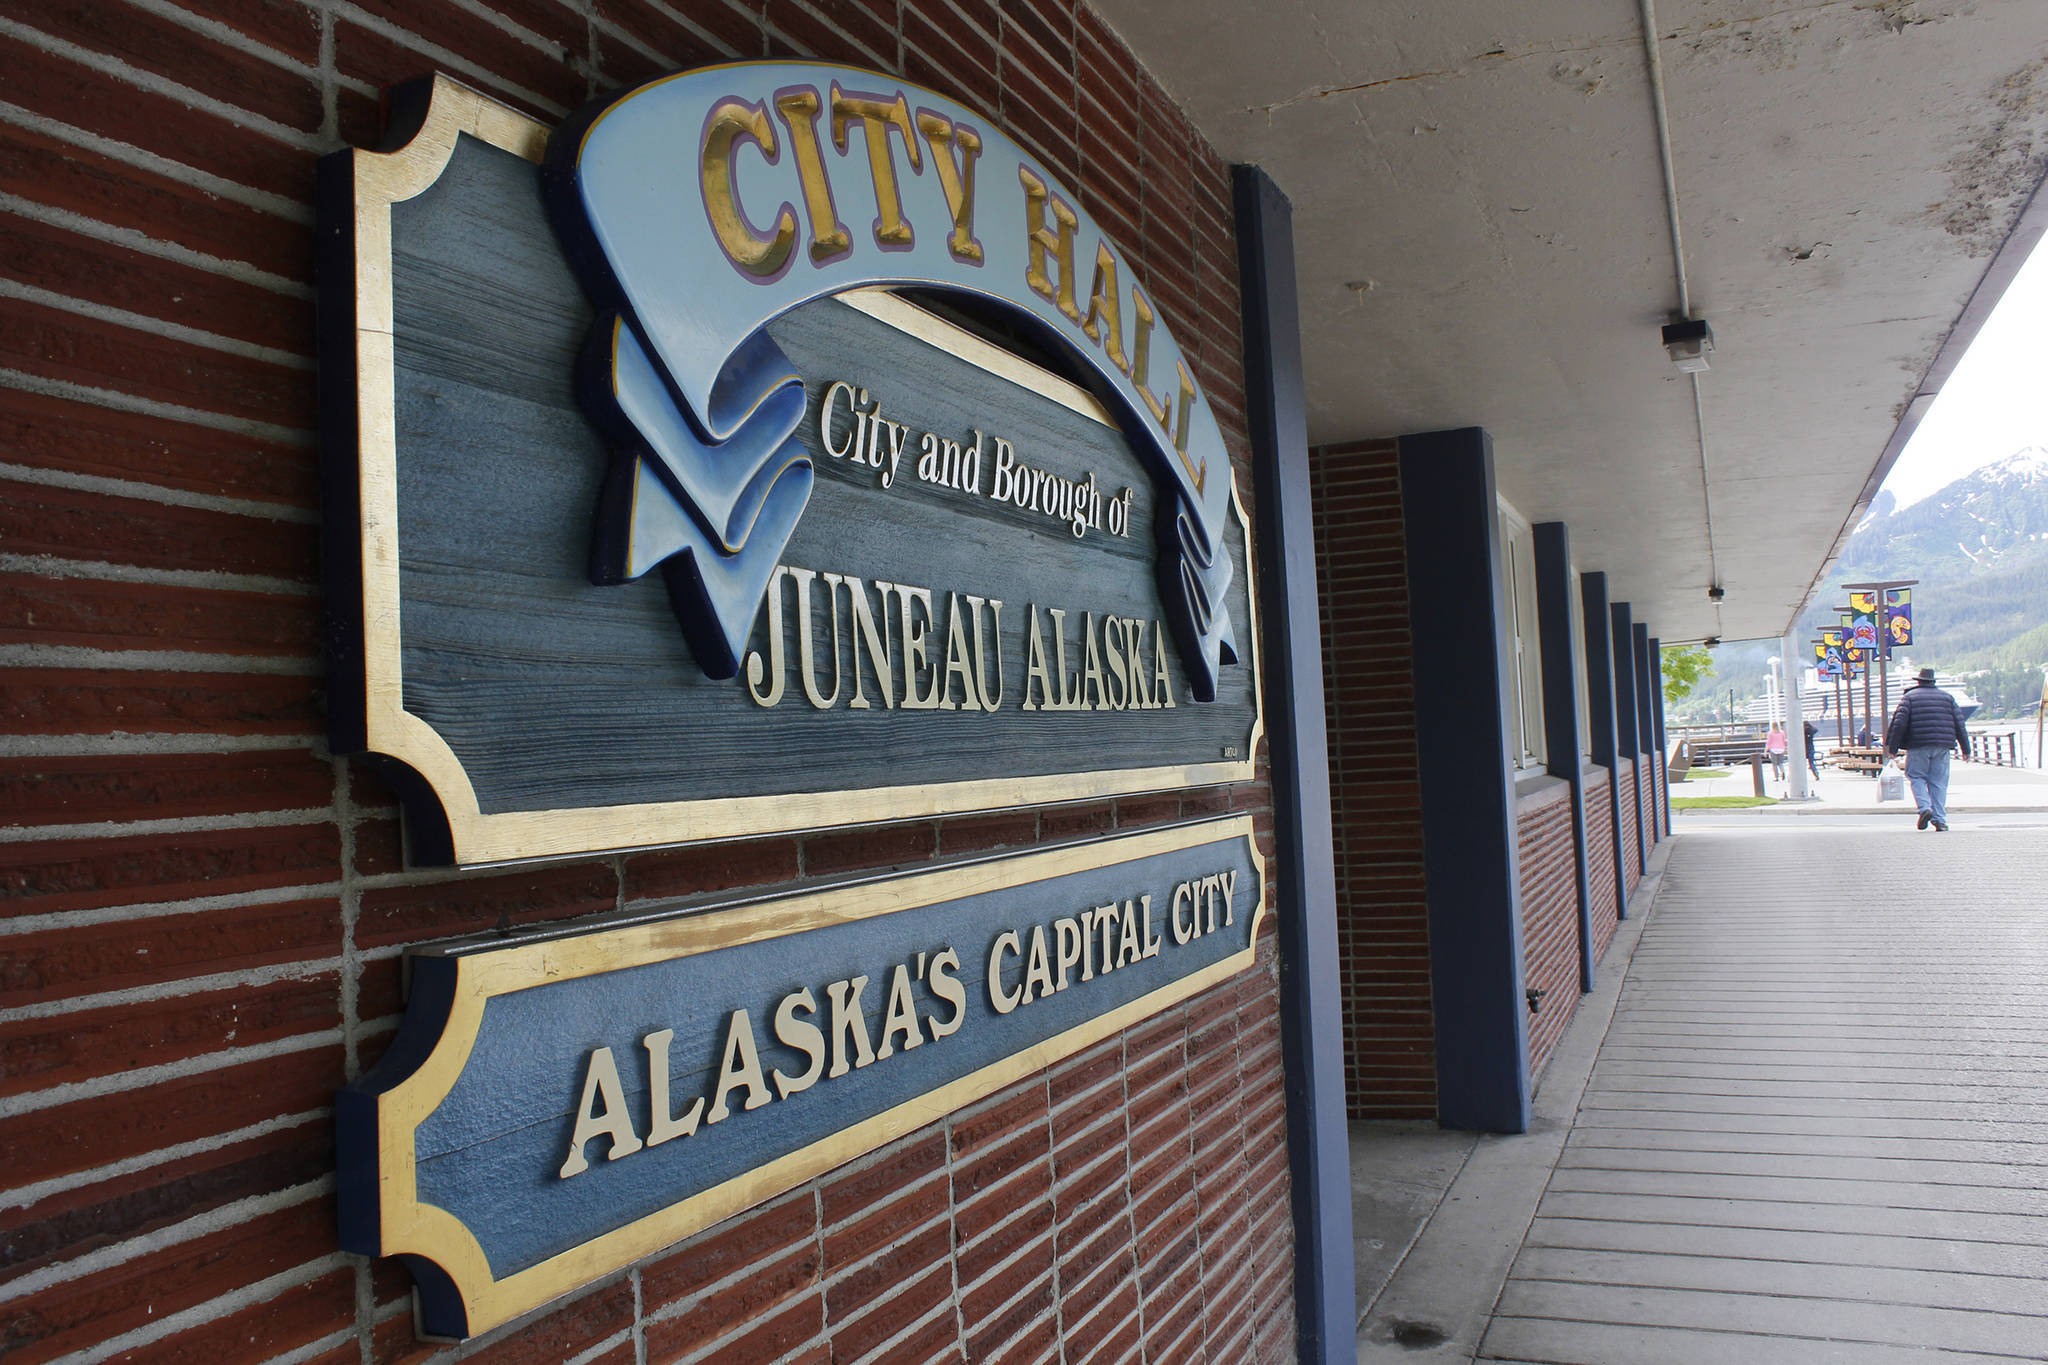 The City and Borough of Juneau will consider whether to offer a property tax reduction to encourage housing development downtown. (File Photo)